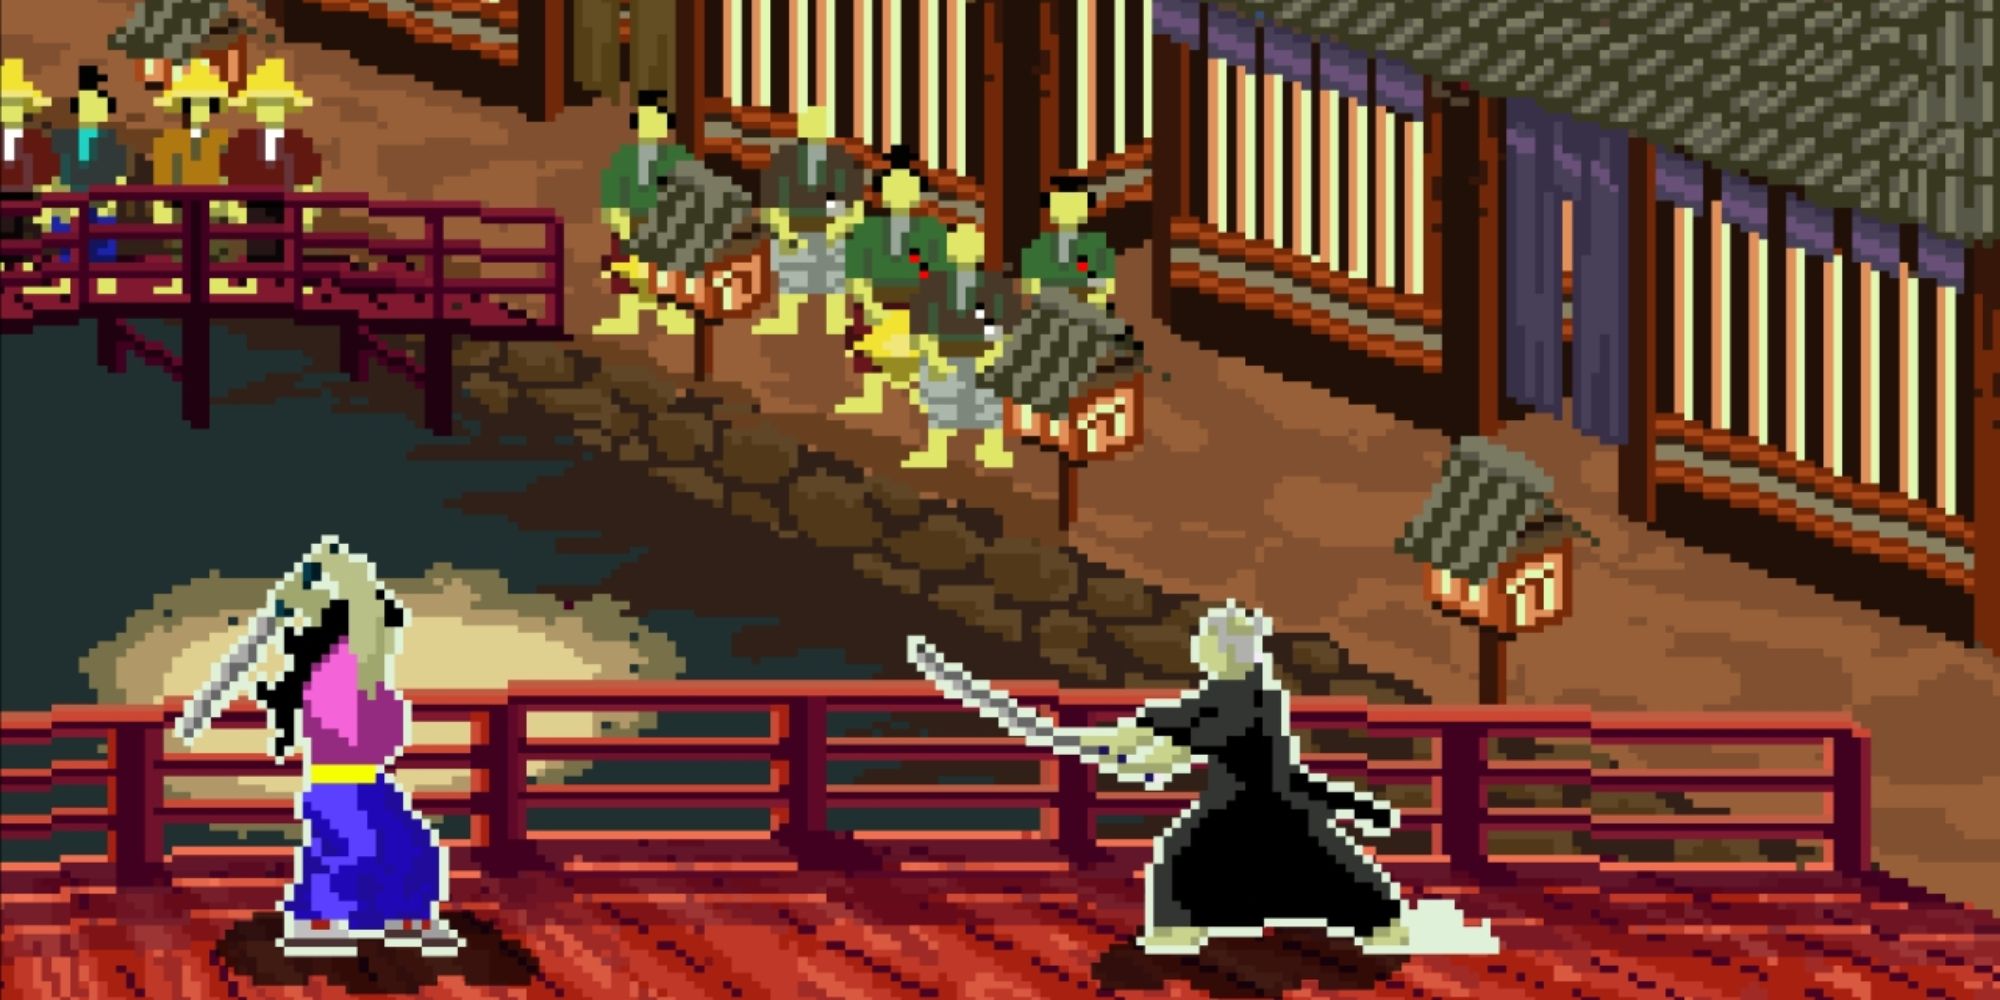 a 2D wide shot pixel art image from One Strike of two fighters, one in black wielding a sword and the other in purple, standing opposite each other on a bridge while spectators watch 